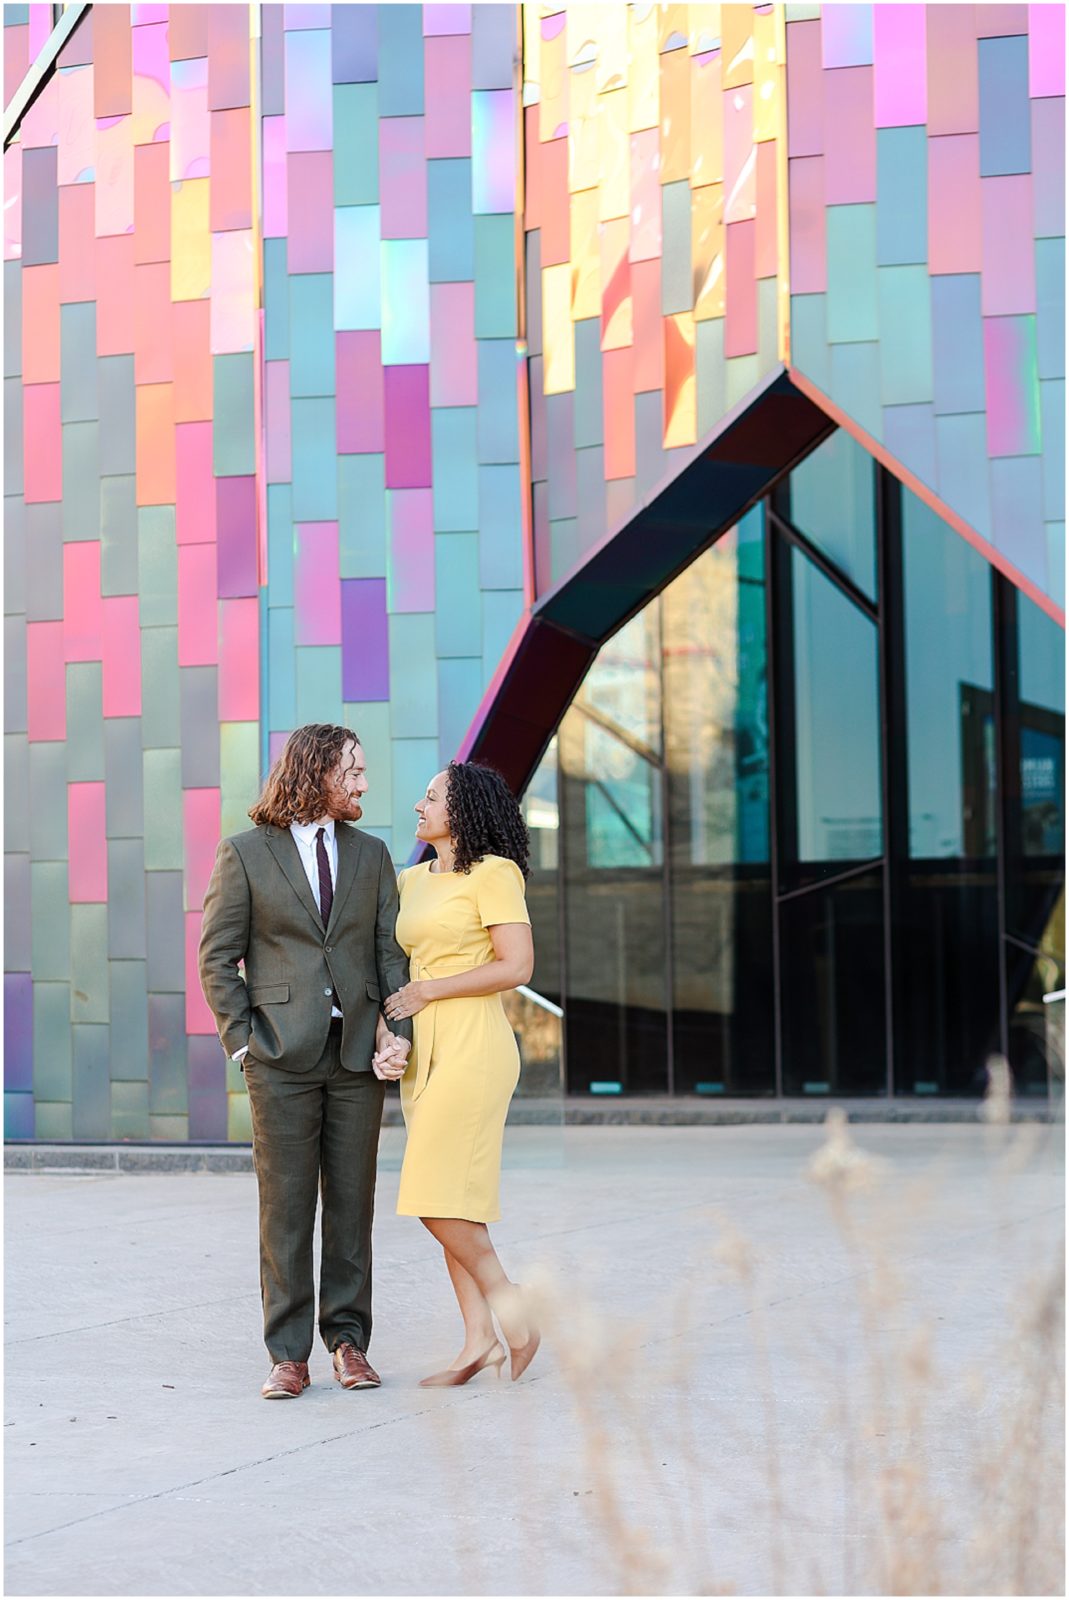 Overland Park Museum at Prairefire Engagement Photos - Kansas City photo location ideas - what to wear for your engagement photos - arterra wedding photography